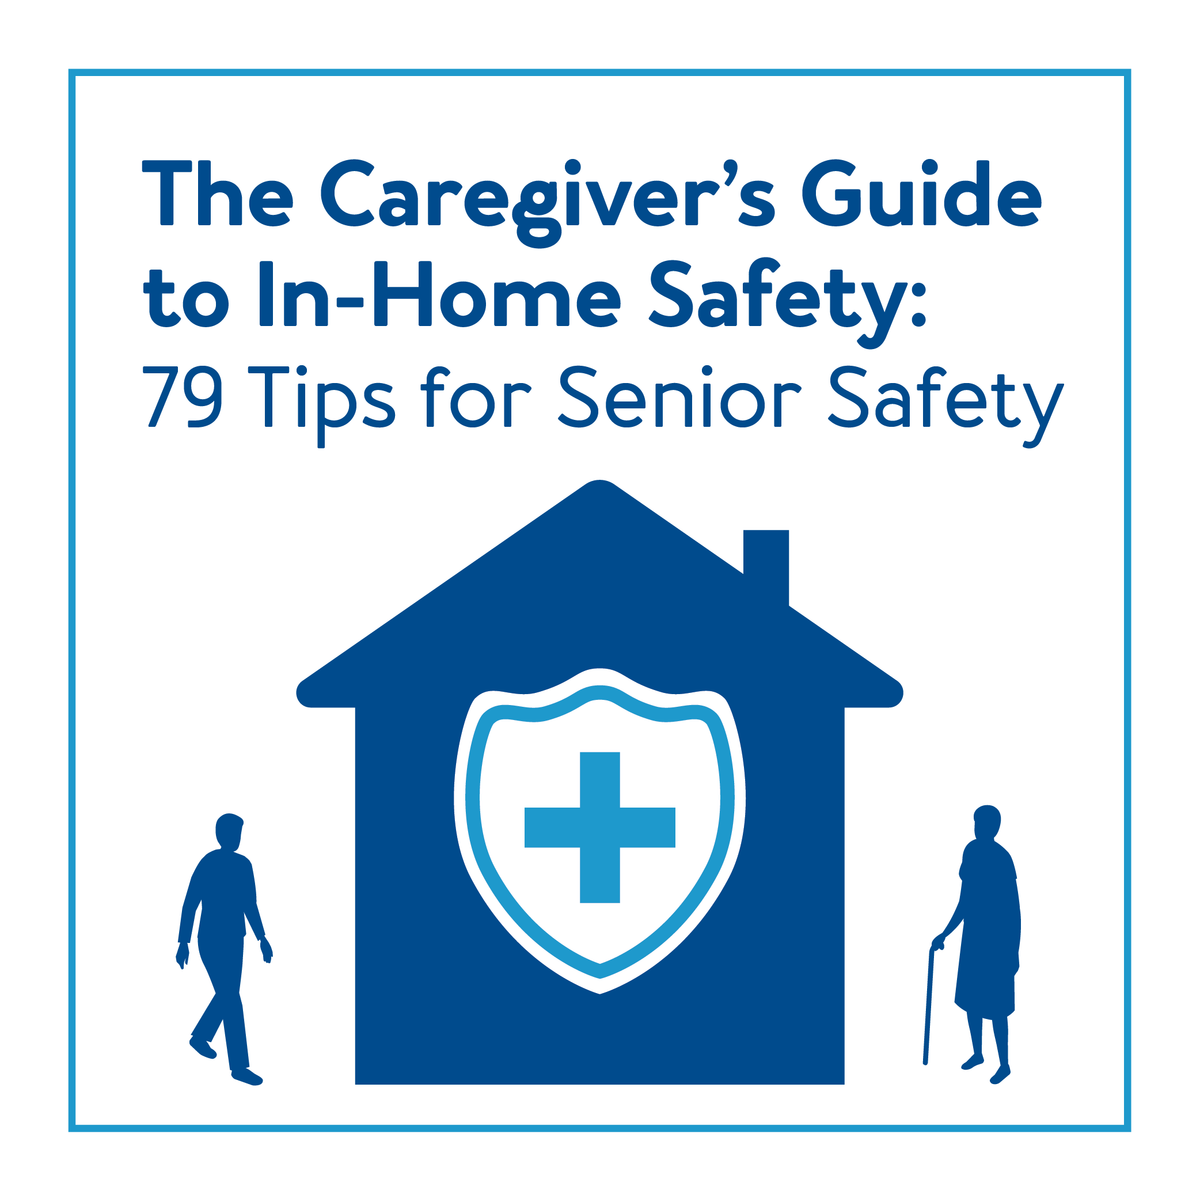 Home graphic with two outlines of people, text . The Caregiver’s Guide to In-Home Safety: 79 Tips for Senior Safety.